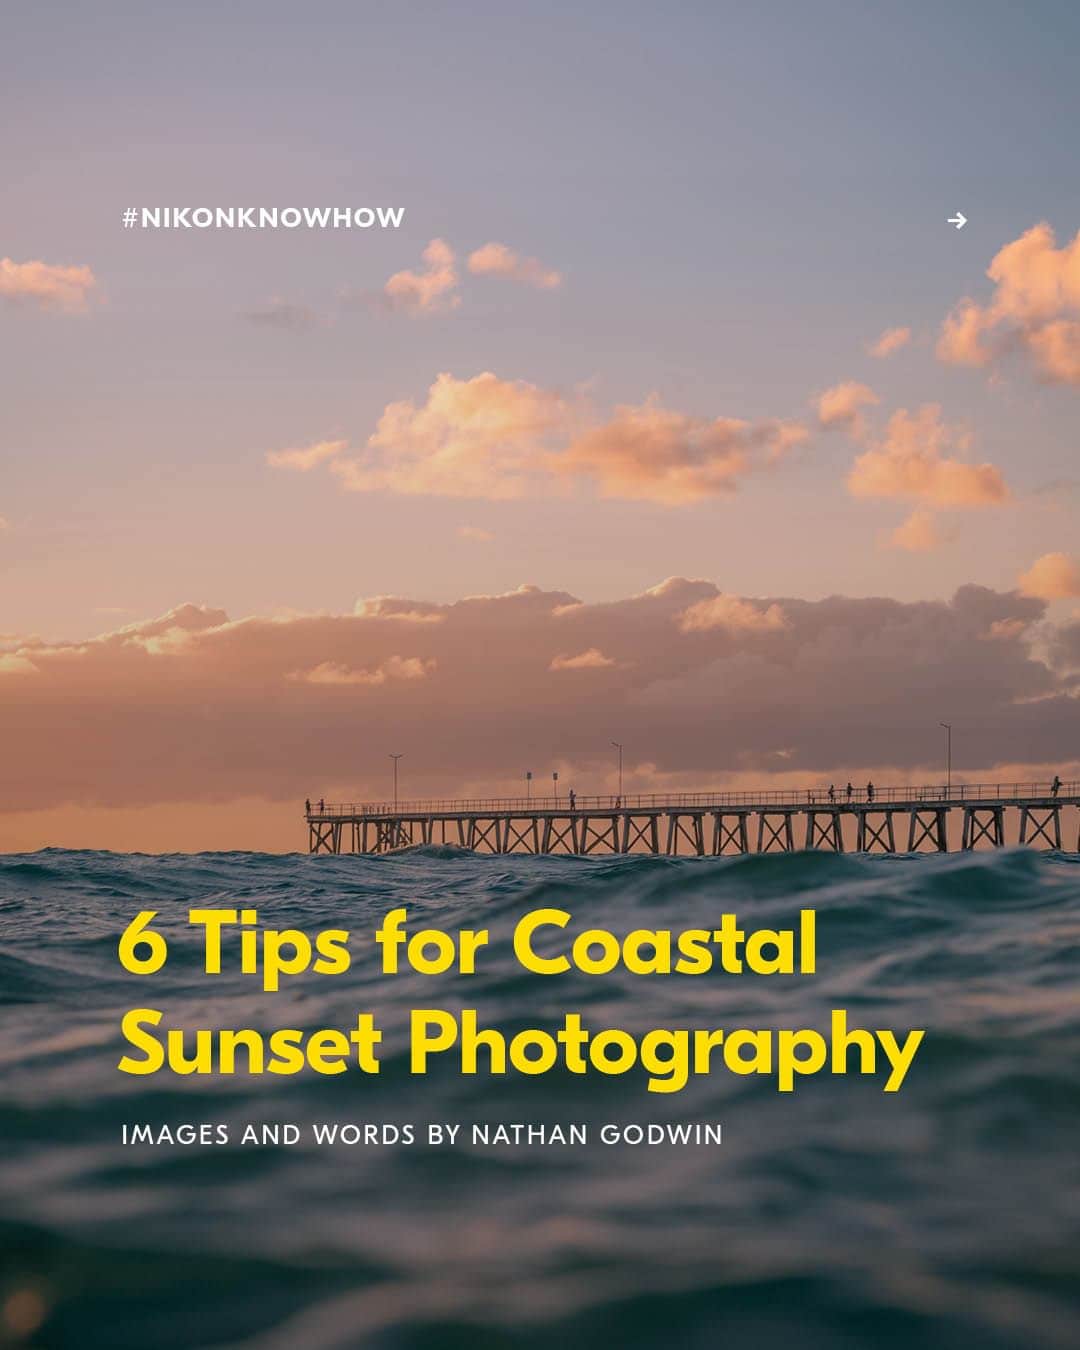 Nikon Australiaのインスタグラム：「Curious about taking photos of breathtaking sunsets this season?  In today's #NikonKnowHow, @nathangodwin shares his expert insights on experimenting with angles and camera settings in his 6 Tips for Costal Sunset Photography.  Swipe through to read them all!  #Nikon #NikonAustralia #MyNikonLife #NikonCreators #NikonKnowHow #Zseries #LandscapePhotography #SunsetPhotography #Australia」